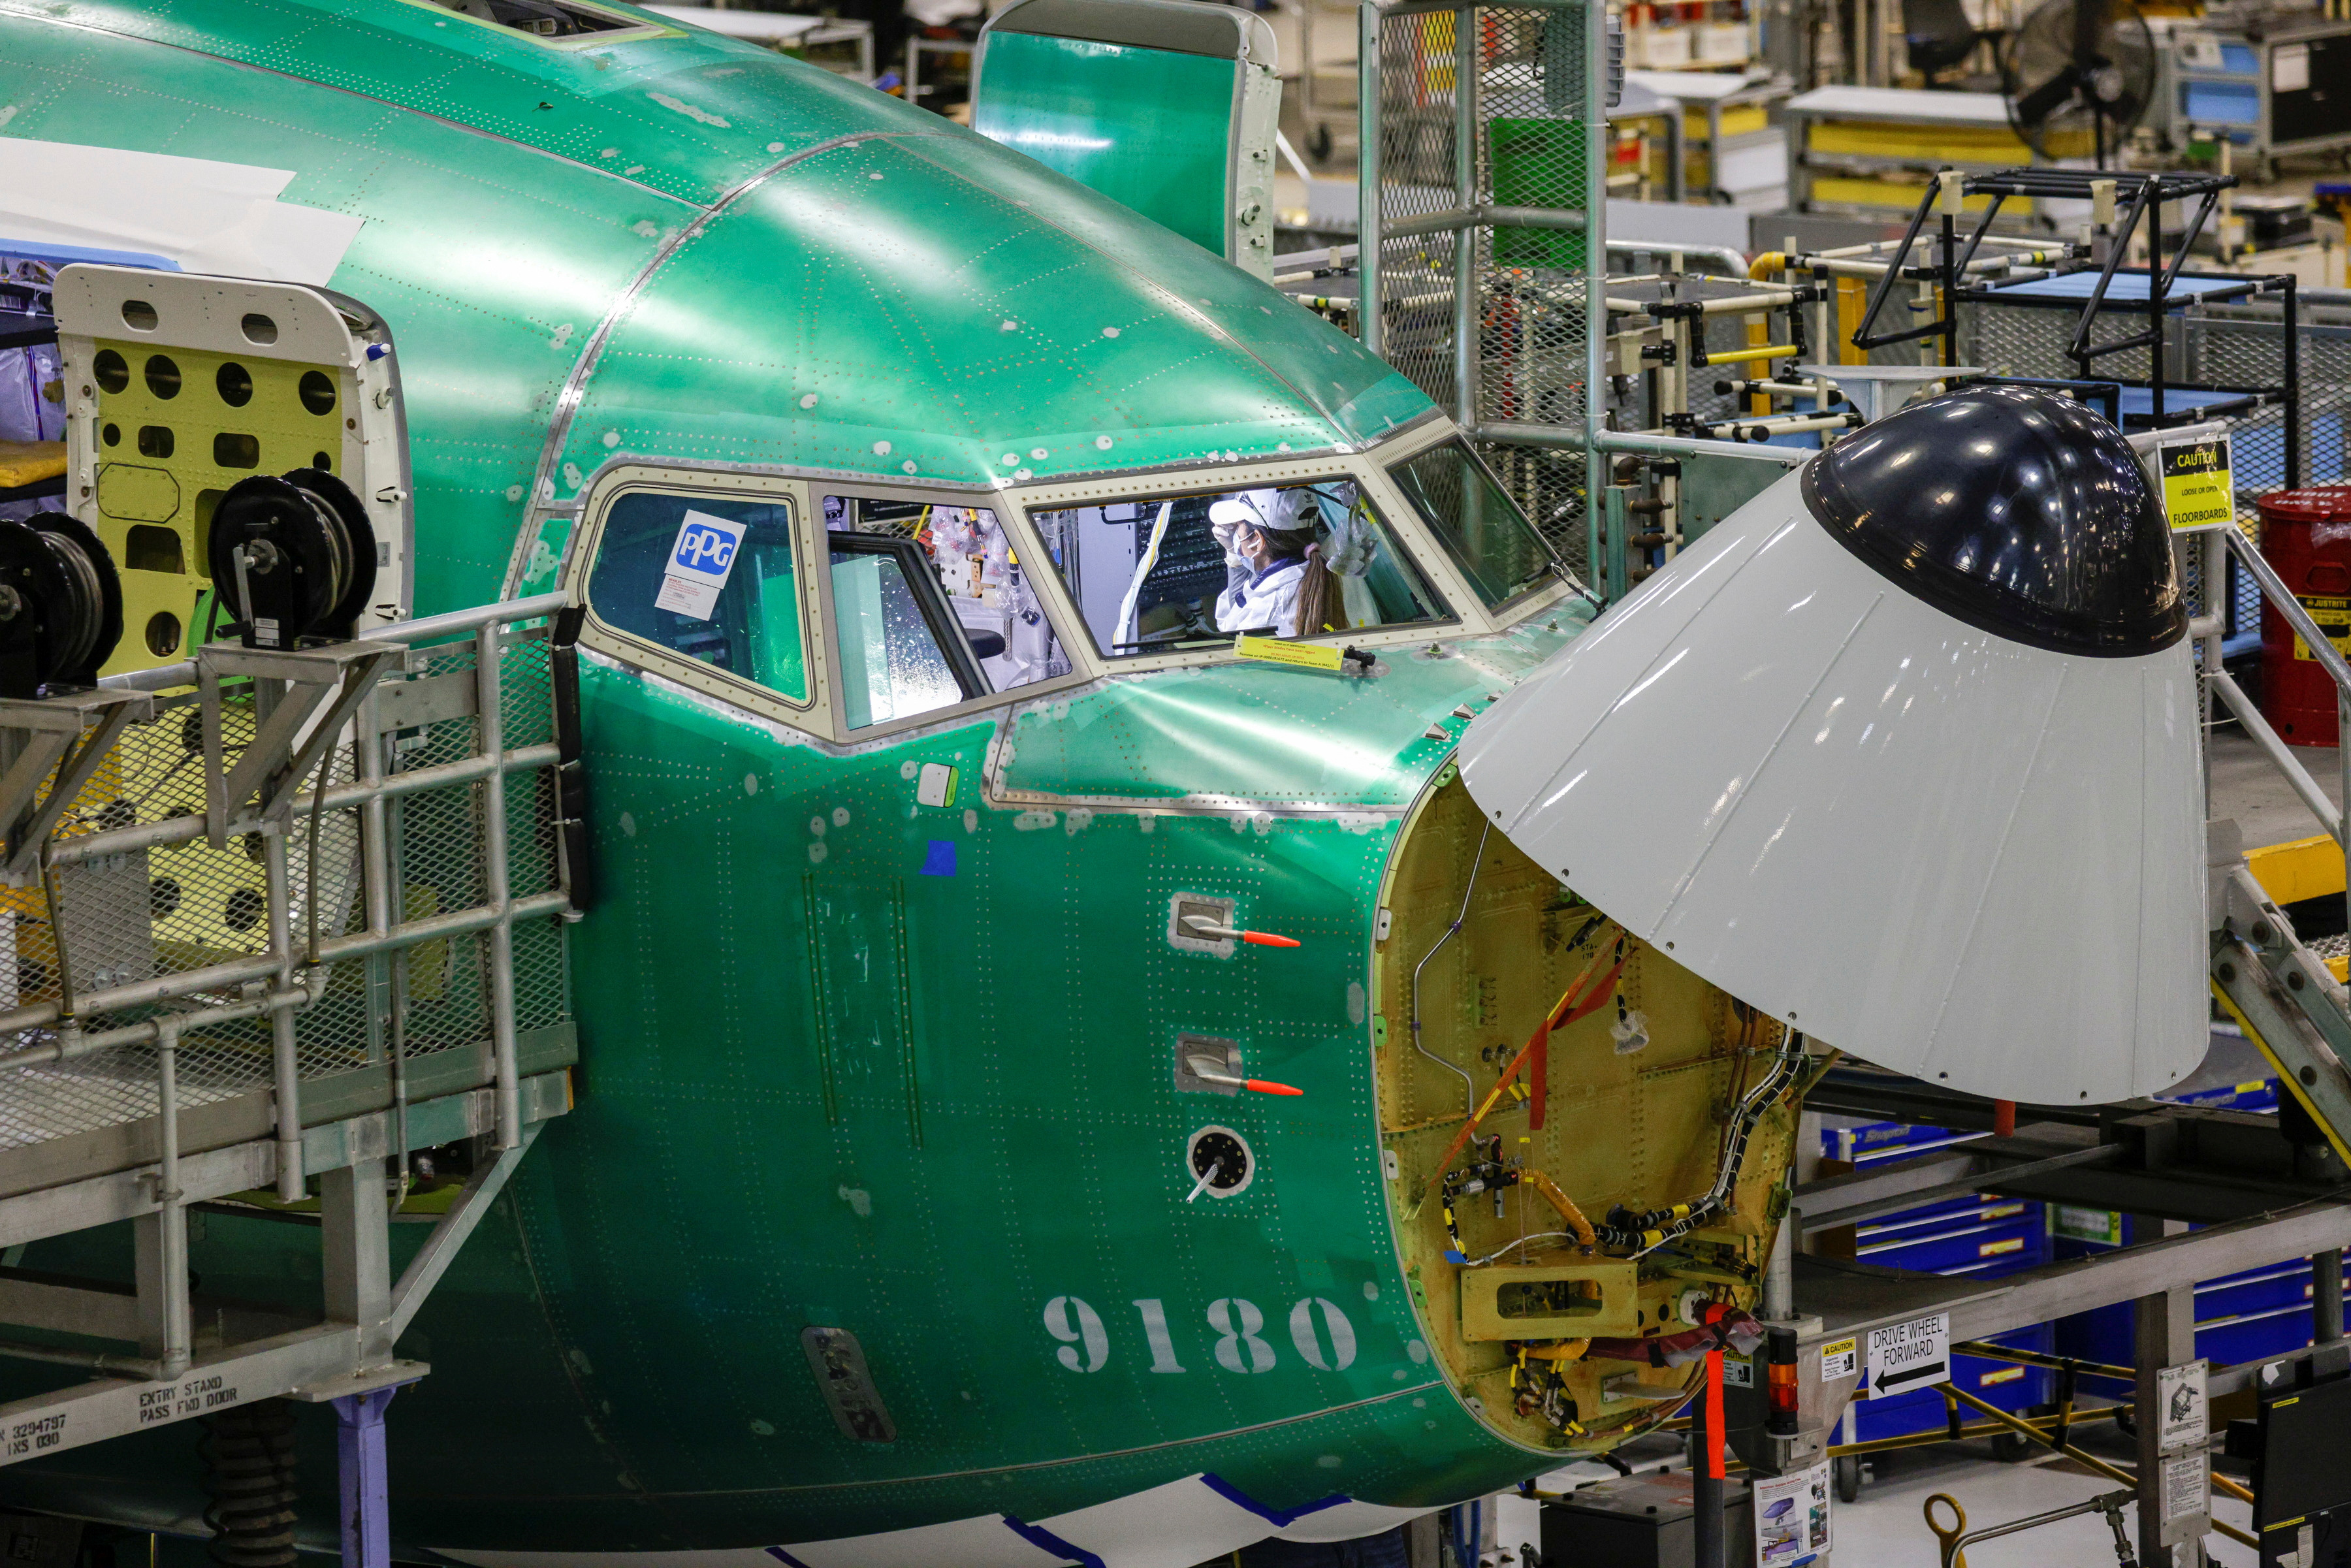 The P-8 production line is pictured at Boeing's 737 factory in Renton